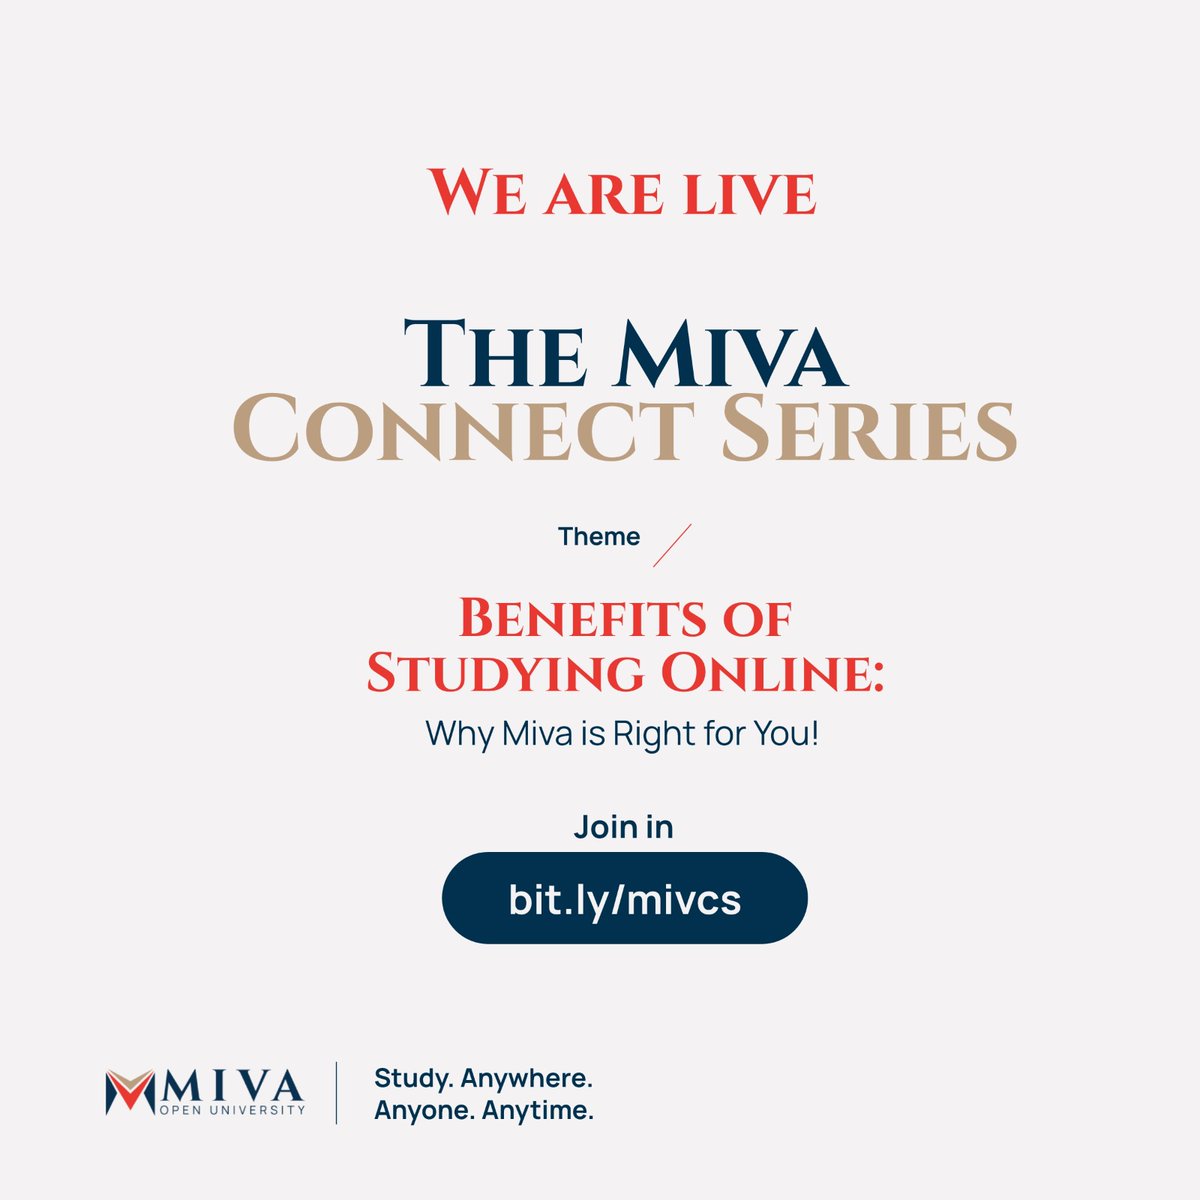 We are LIVE!

Join us for the Miva Connect Series, where we will be discussing the benefits of online learning and why Miva is the right fit for you.

Tap this link  bit.ly/mivcs to register and join us.

#MivaOpenUniversity #StudyatMiva #MivaConnectSeries #EdChat